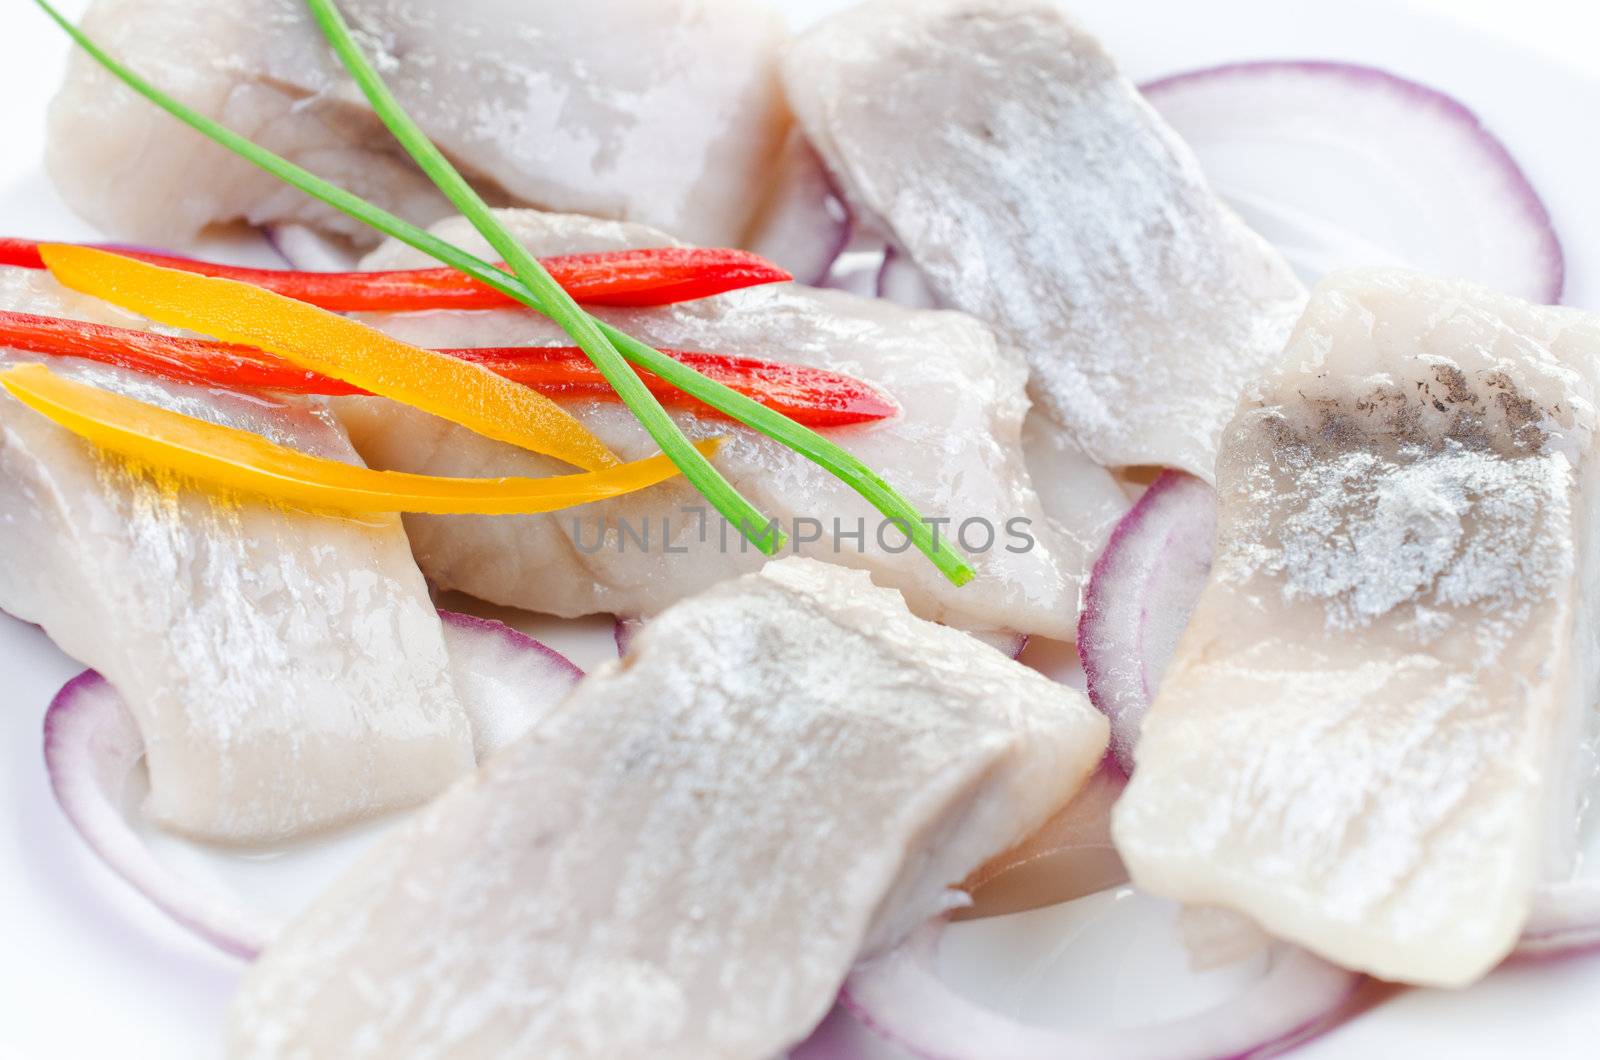 Marinated atlantic herring bites with spring onion and red and yellow pepper